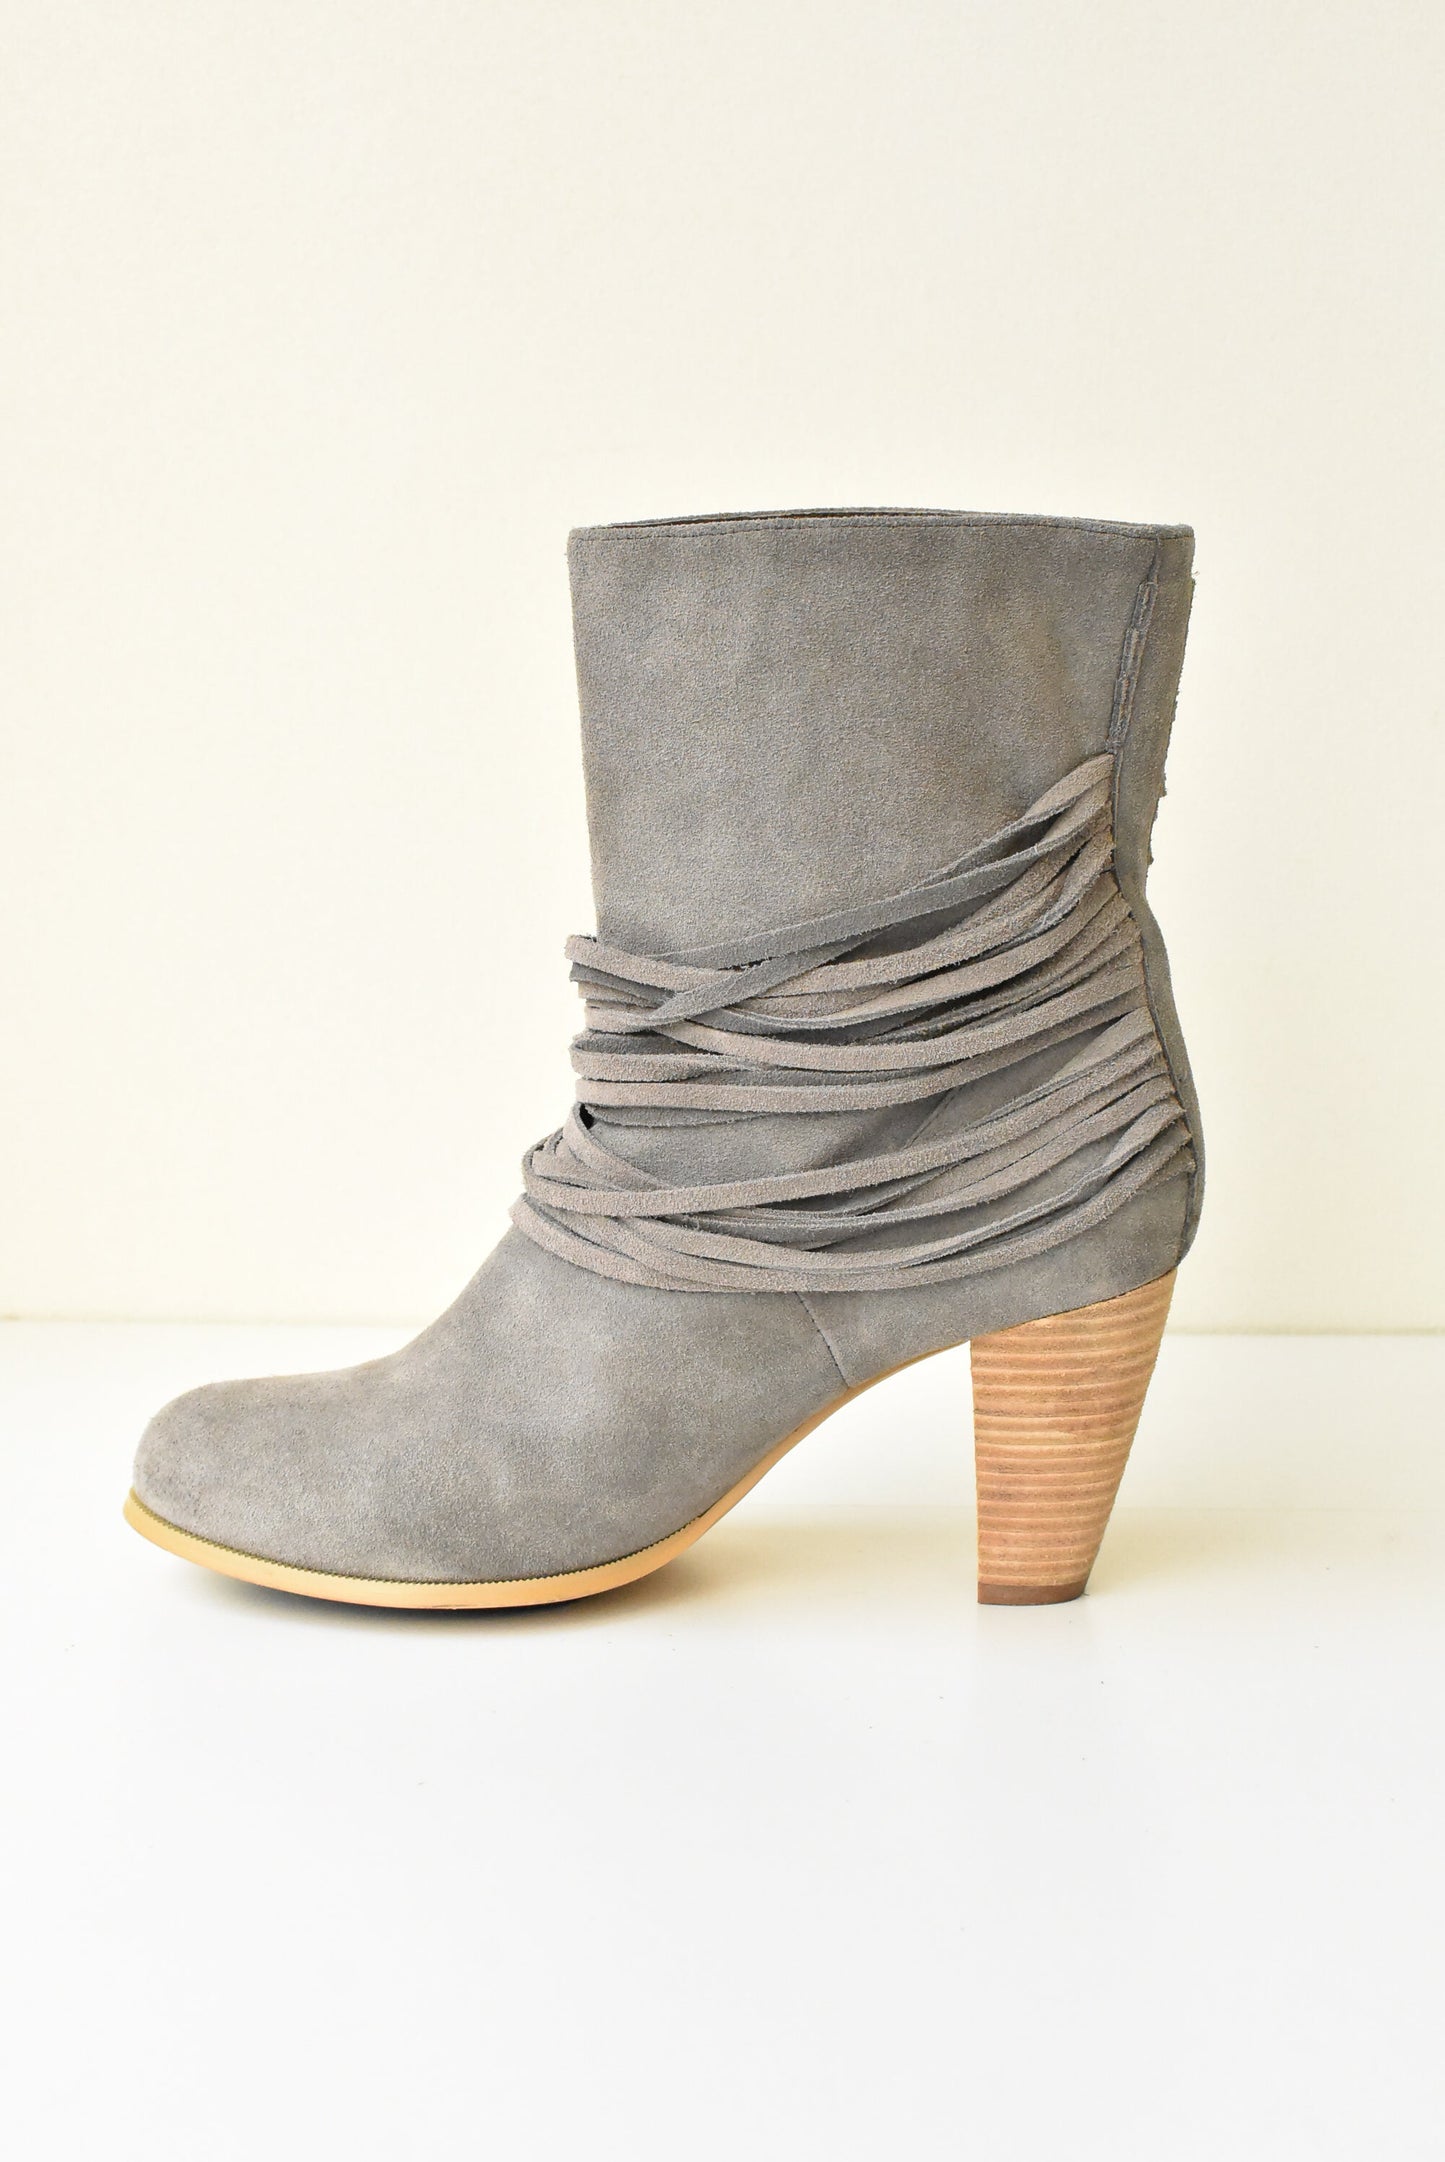 Kathryn Wilson grey suede boots - size 38